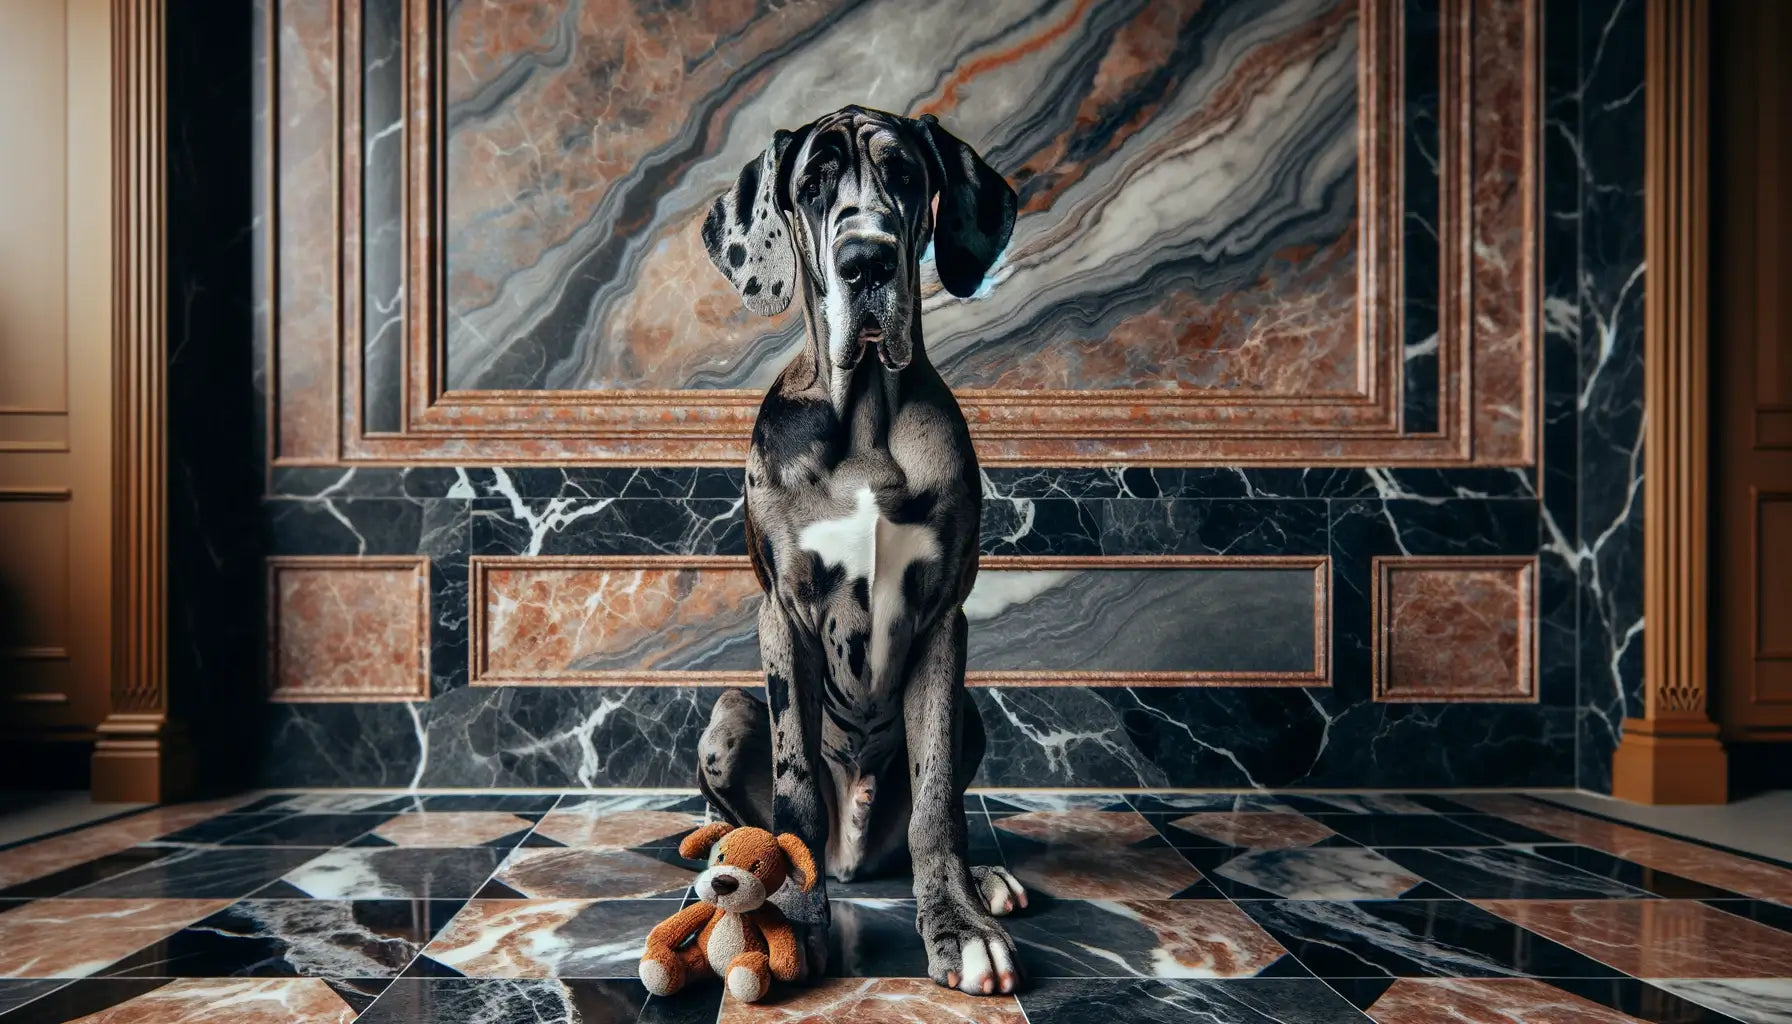 A Brindle Great Dane sitting upright on a marbled floor, with its tricolor brindle coat enhanced by the patterned backdrop.